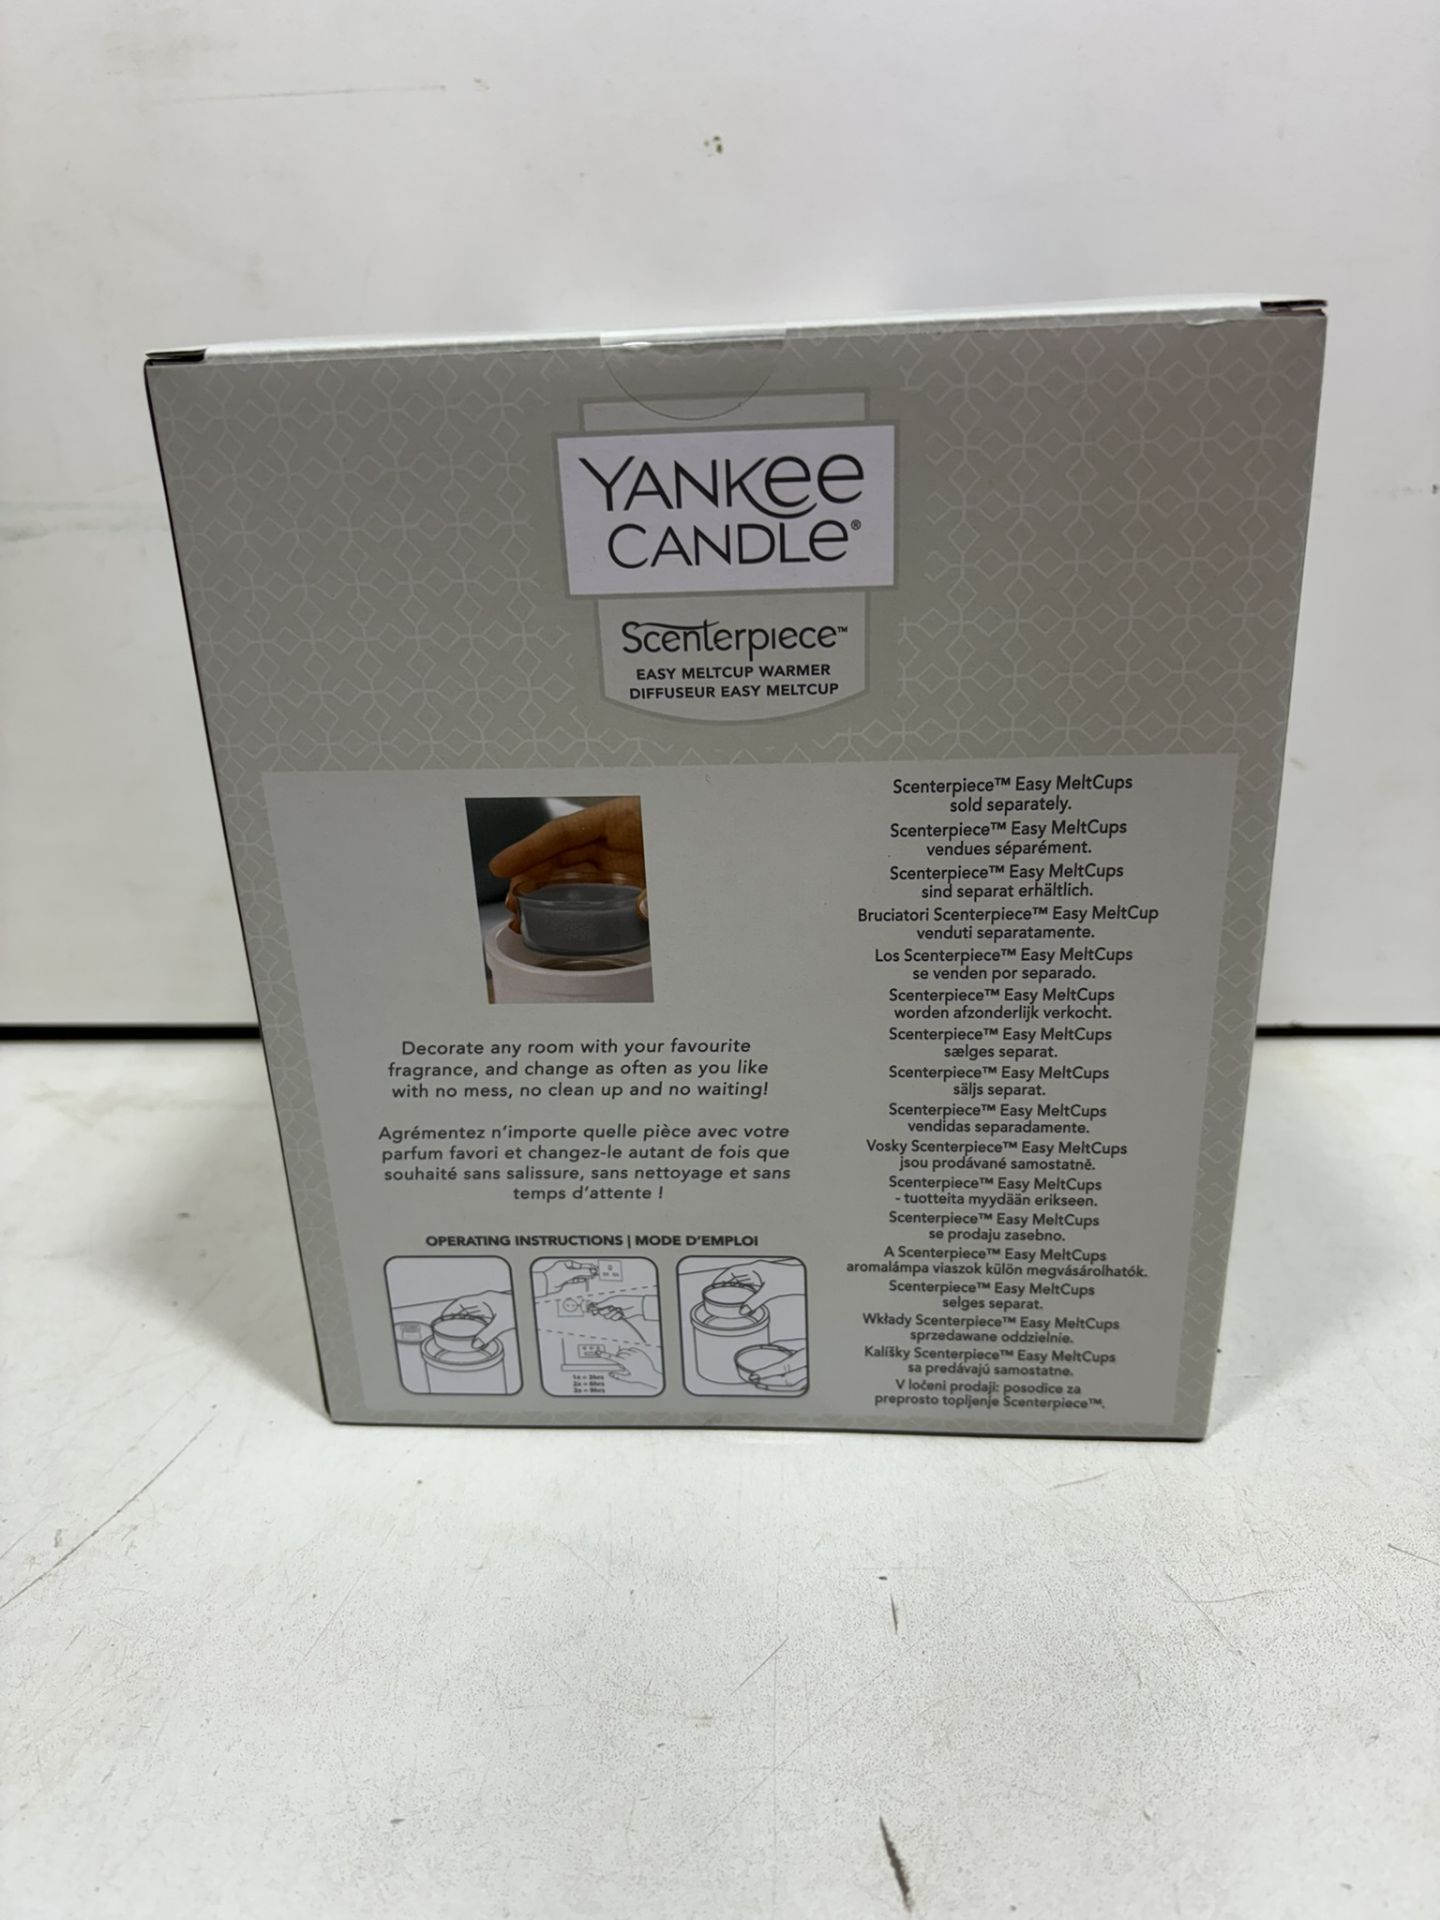 13 x Yankee Candle Belmont Ceramic Melt Cup Scenterpiece Warmers - Image 5 of 7